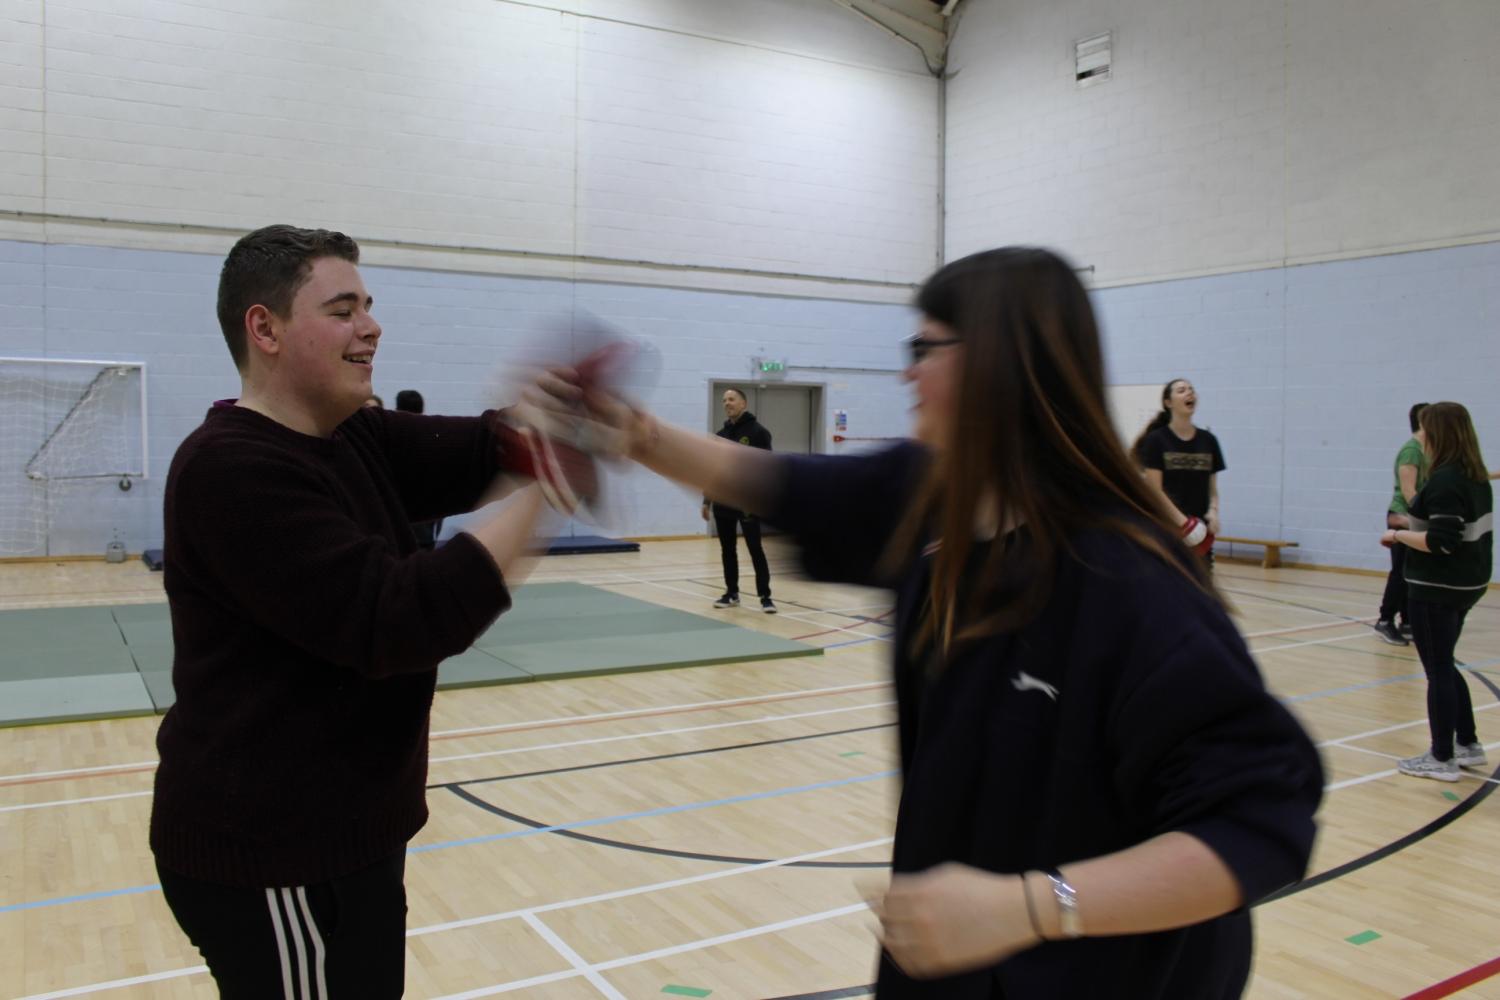 Students took part in a self-defence class